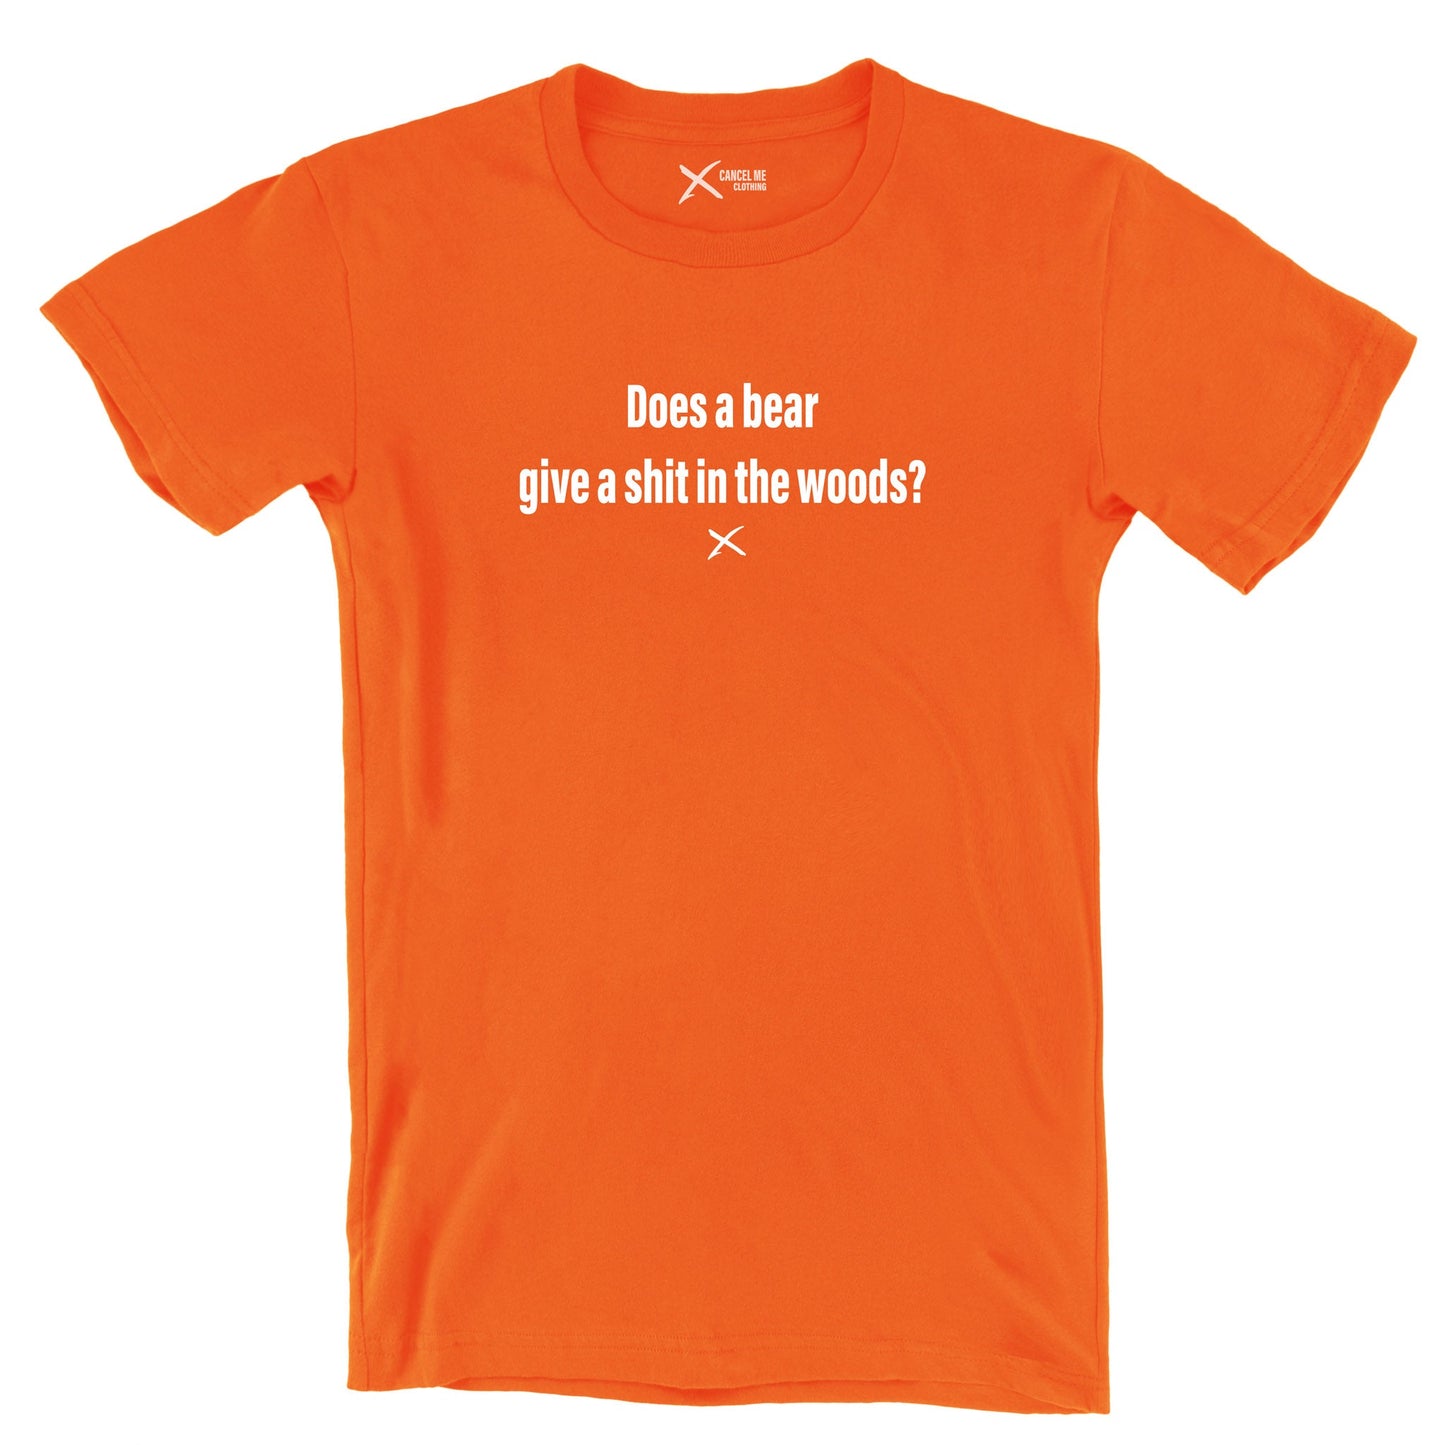 Does a bear give a shit in the woods? - Shirt